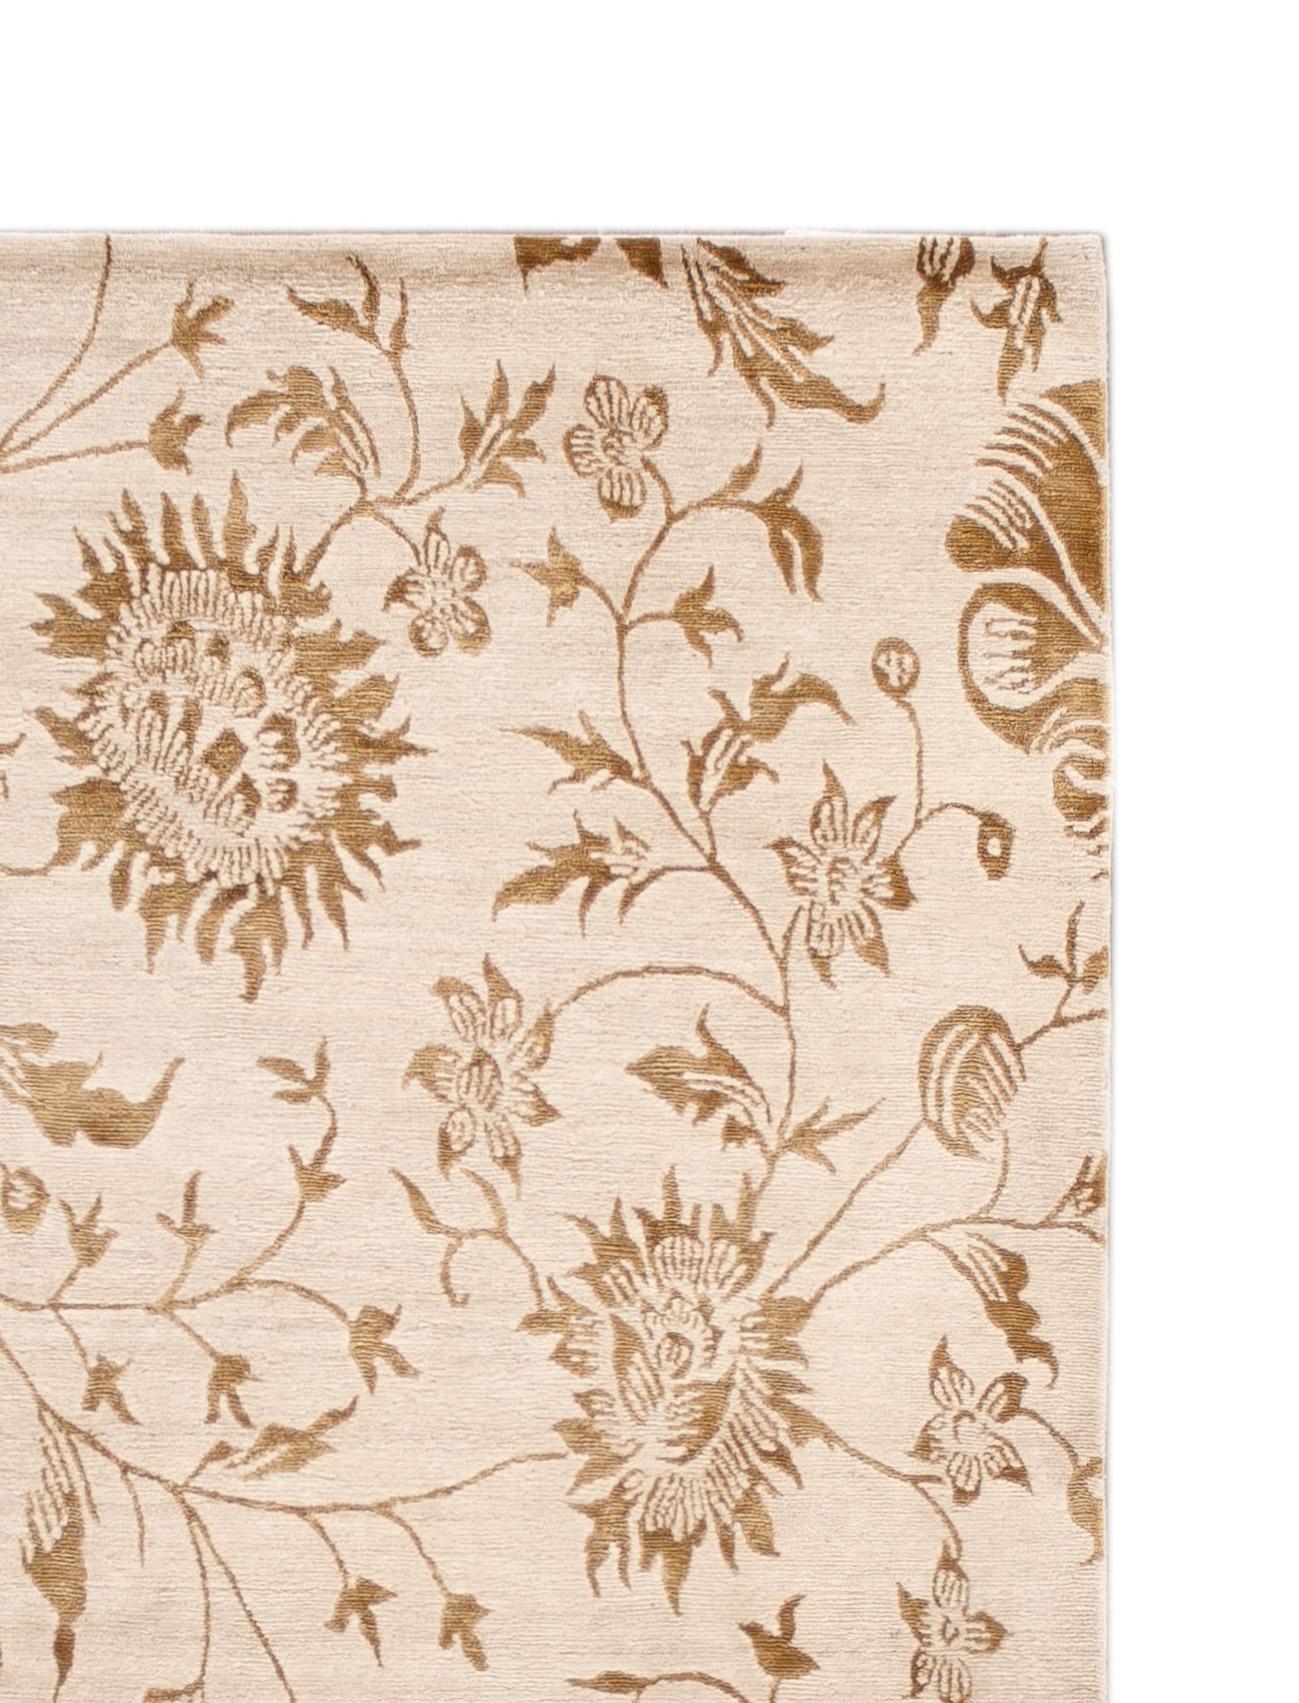 This beautiful contemporary Tibetan Scatter rug has a beige field with dark brown floral accents. 

This rug measures 4' x 6'.